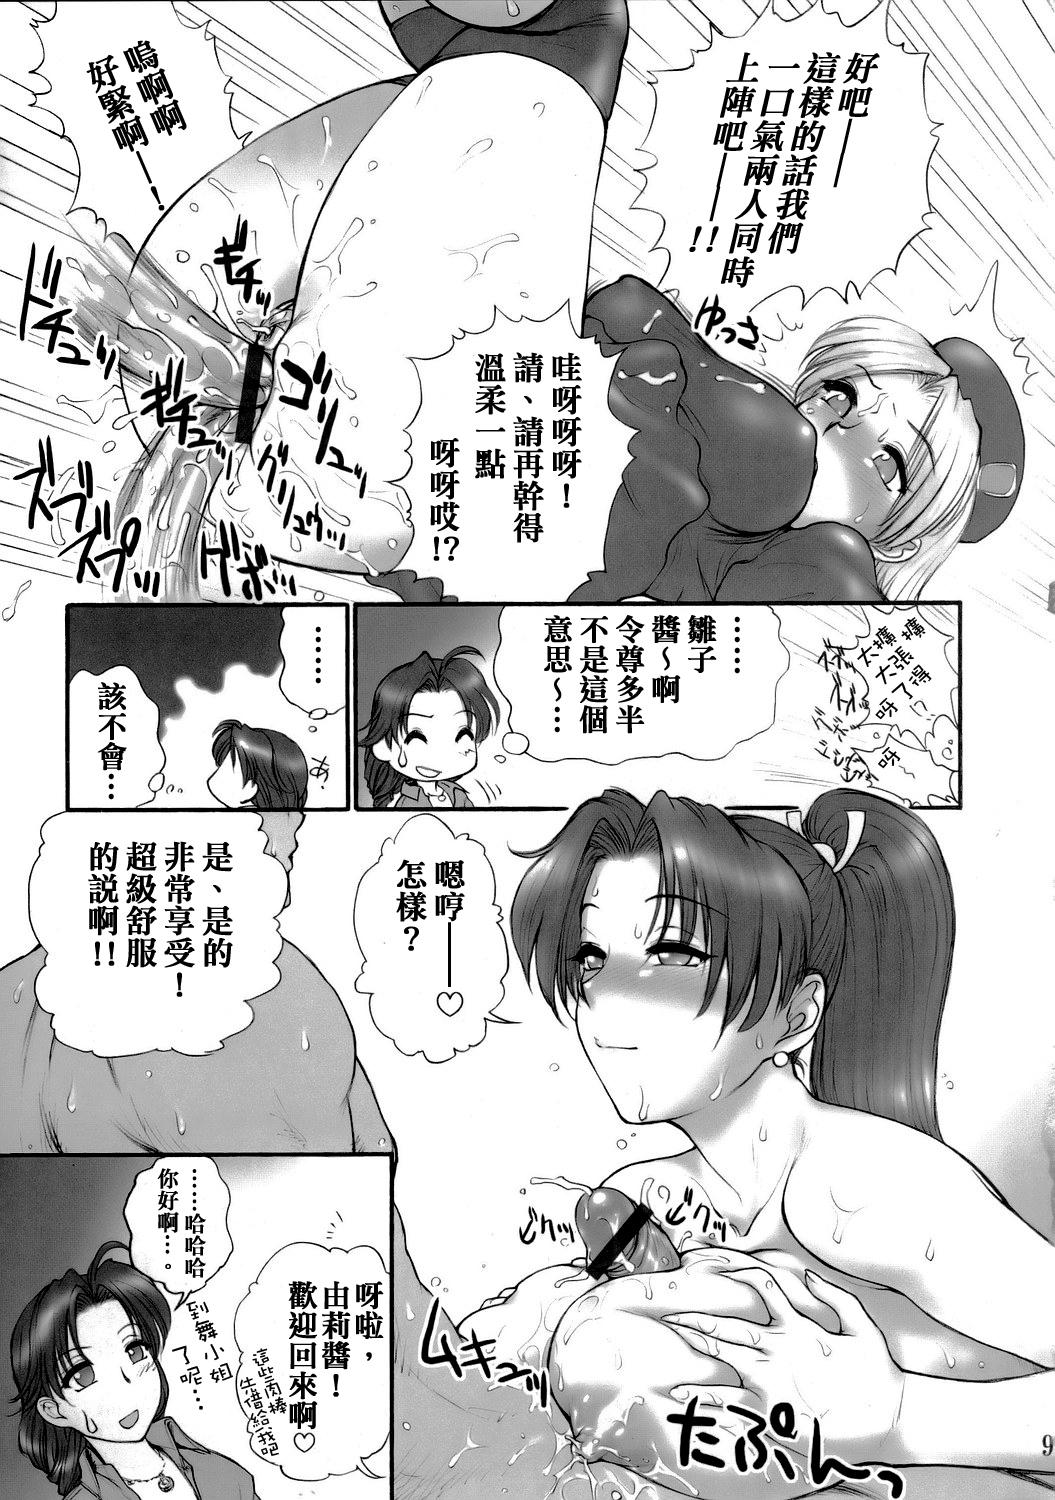 Novinho (SC29) [Shinnihon Pepsitou (St. Germain-sal)] Report Concerning Kyoku-gen-ryuu (The King of Fighters) [Chinese] [日祈漢化] - King of fighters Gaysex - Page 11